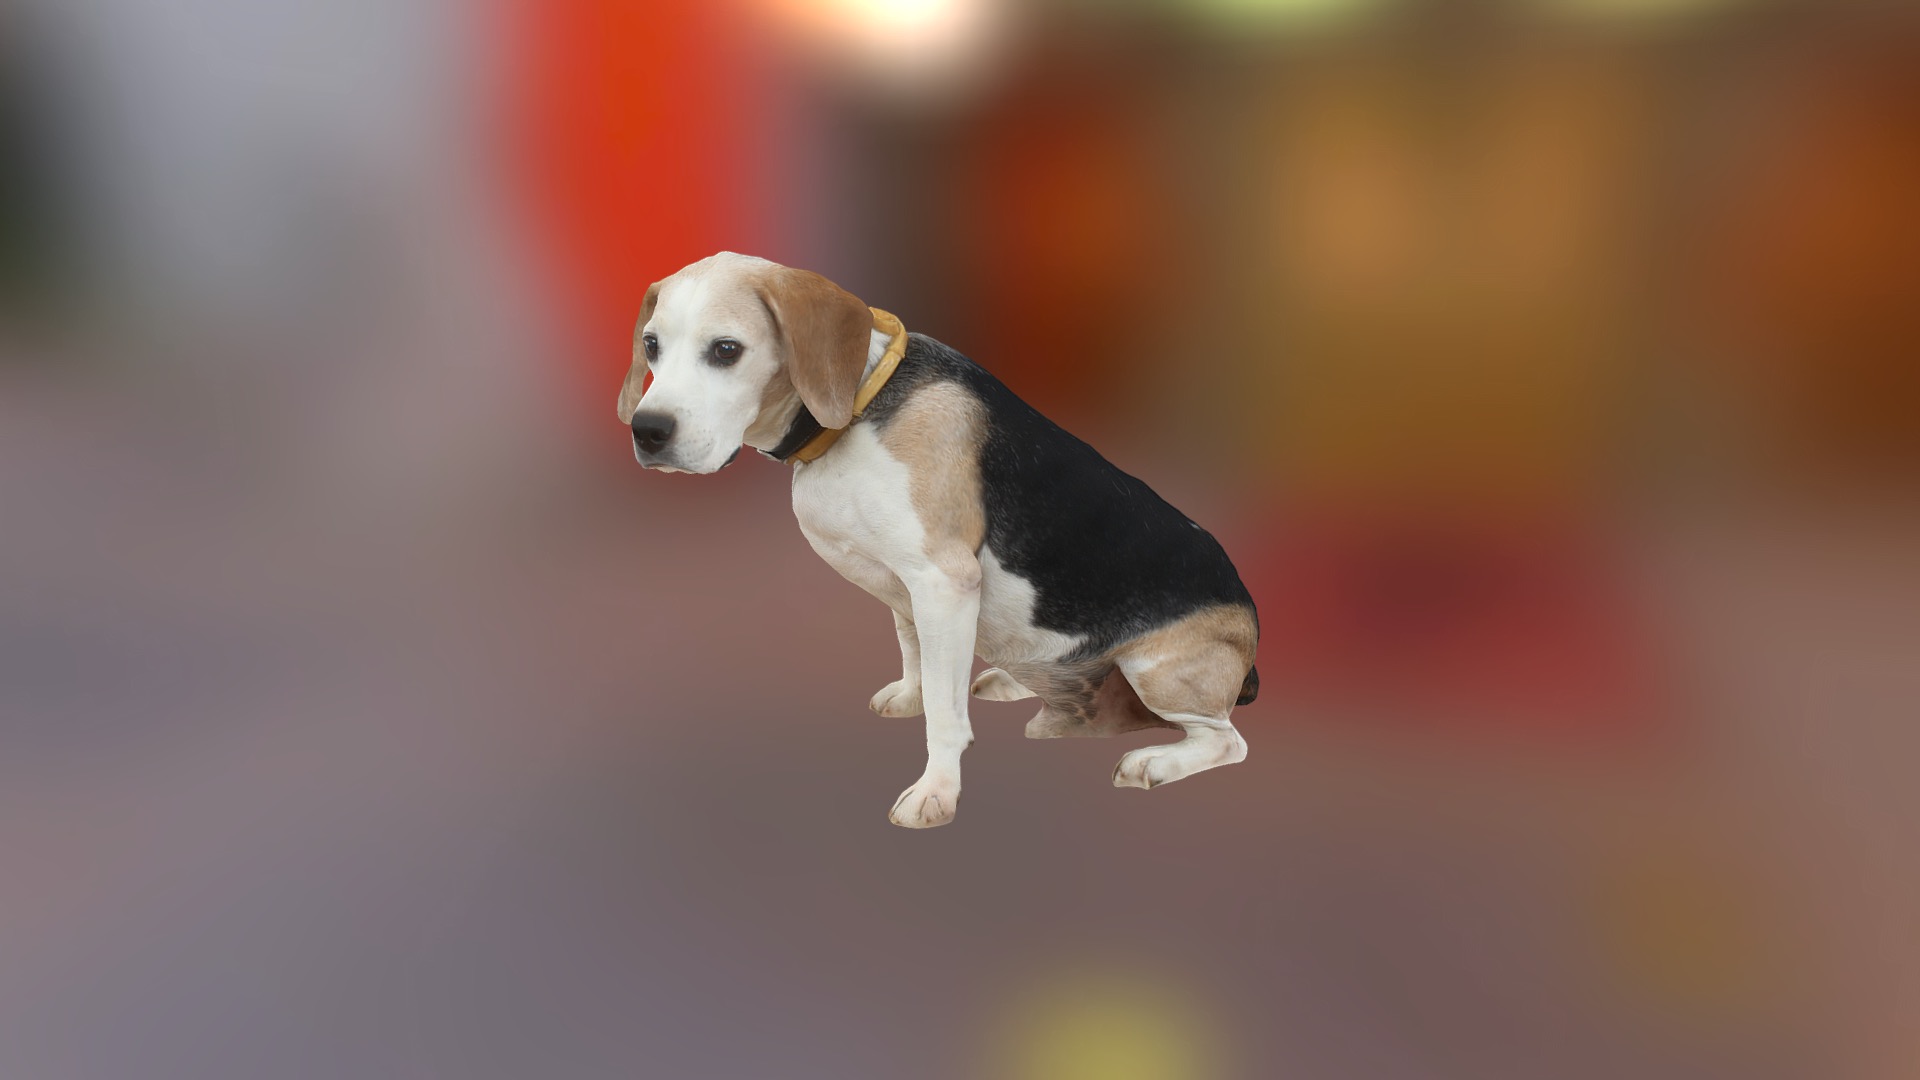 3D model Poker The Beagle - This is a 3D model of the Poker The Beagle. The 3D model is about a dog standing on a red background.